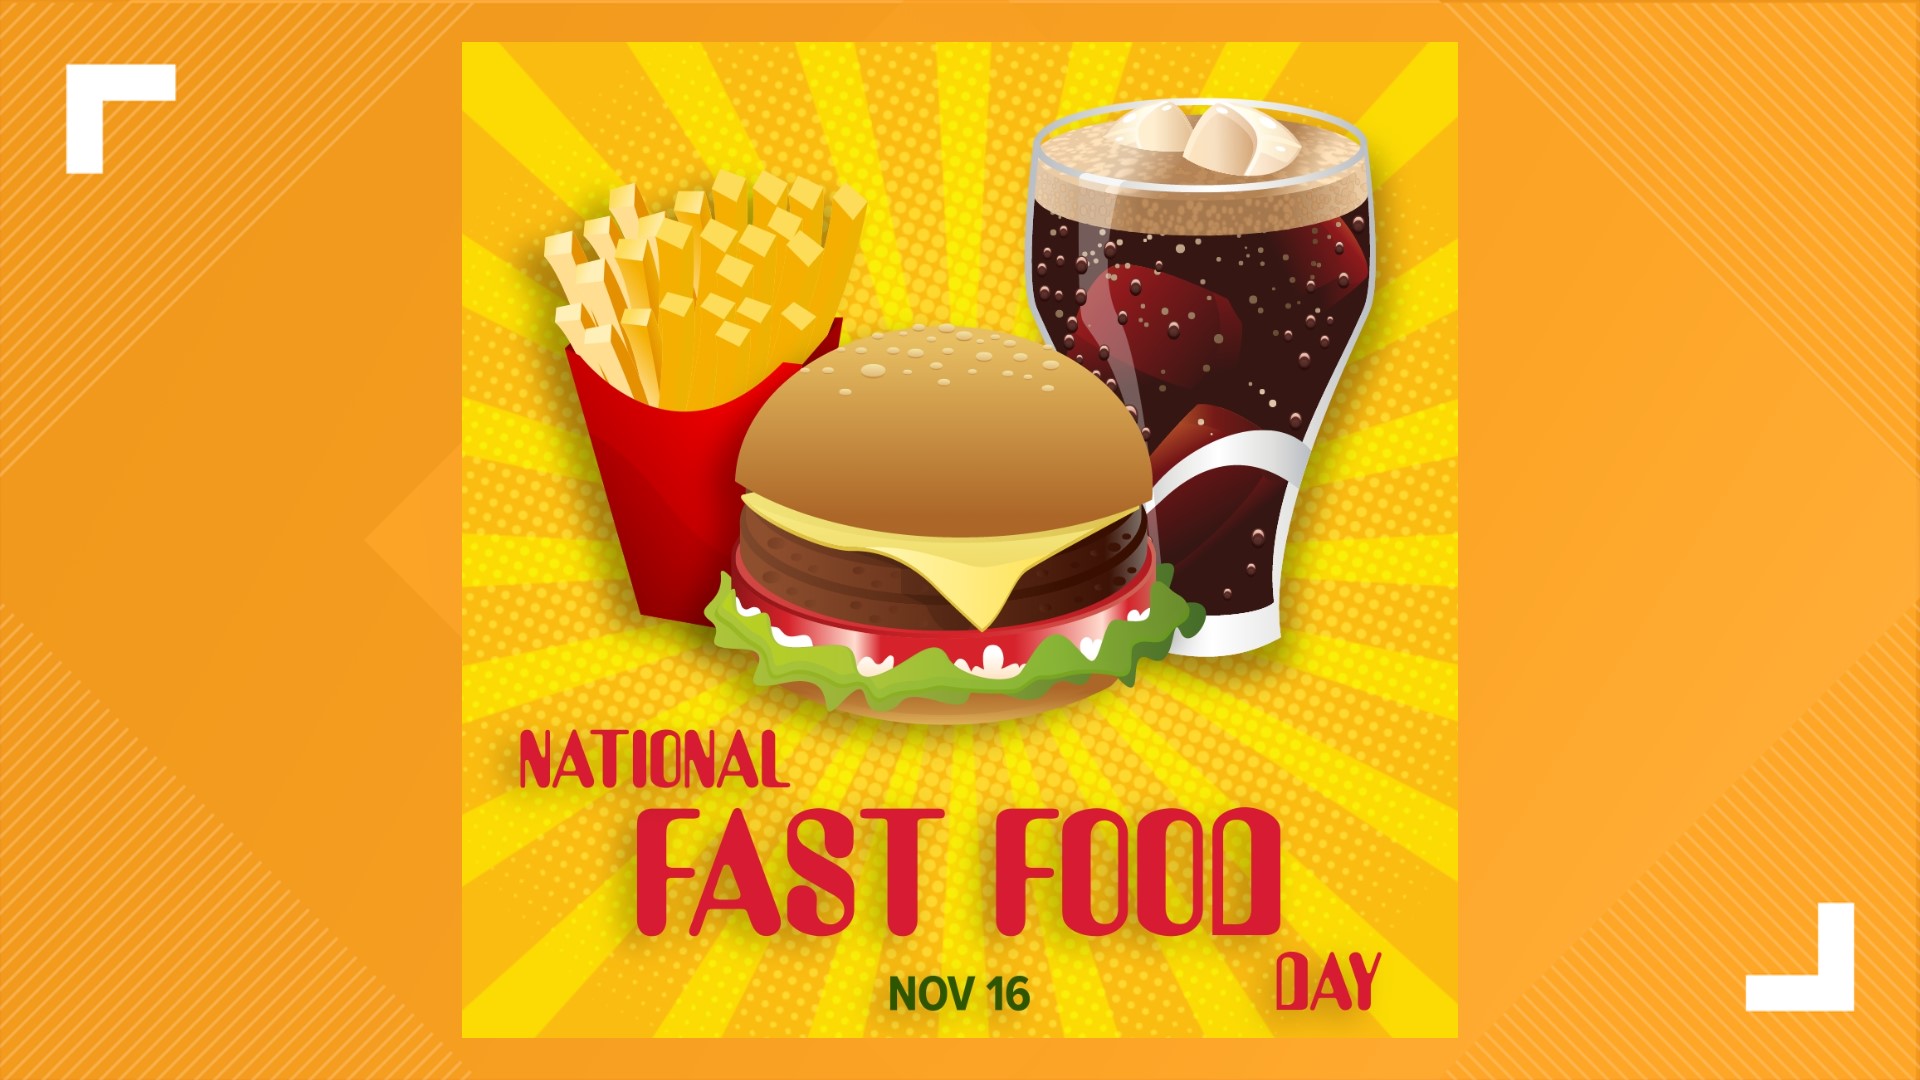 Nov. 16 is National Fast Food Day, and we've compiled a list of deals and offers to help you celebrate!